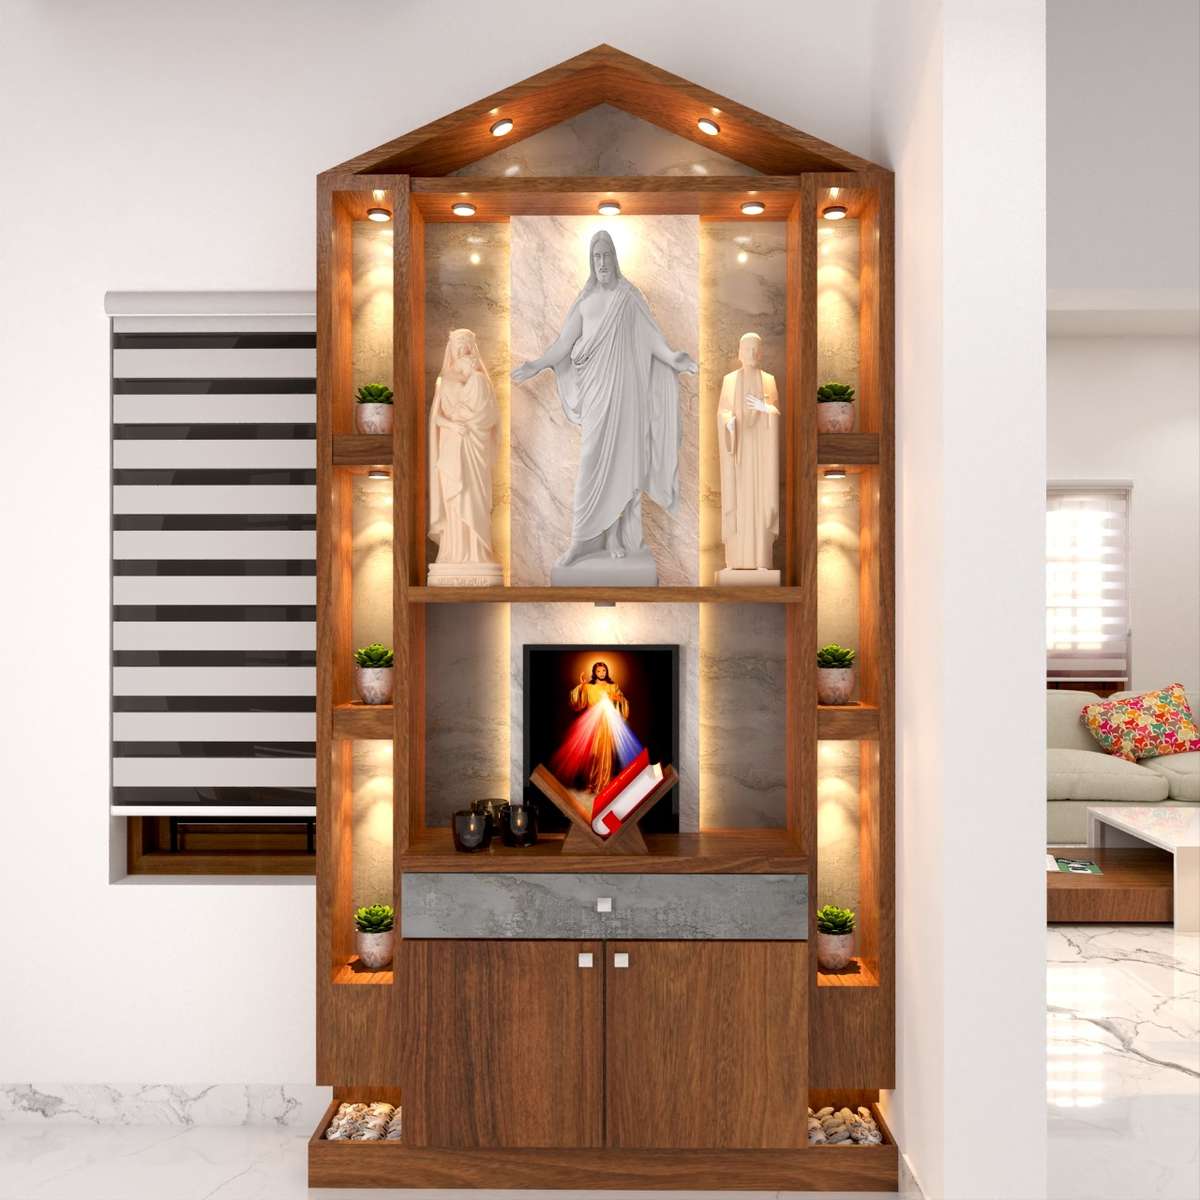 Modern Prayer Unit 
colour change
Modular Home Interior Designs. 
>3000+ shades (Laminates)
>710 BWP Gurjan Marine Plywood 
>2000+ Louvers Charcoal Panel designs.
>Customised Requirements.
>Branded accessories & Material.
>100% Machine Made Units.
>Factory Manufacturing.
>15 Years Warranty.
>Quality Work & Best Finishing. 
For more Details Contact me 
Check this portfolio George Niju 
https://koloapp.in/pro/niju-george
#Niju_george #bringamazinginside #interiordesigner #interiordesign #HomeDecor  #koloapp 